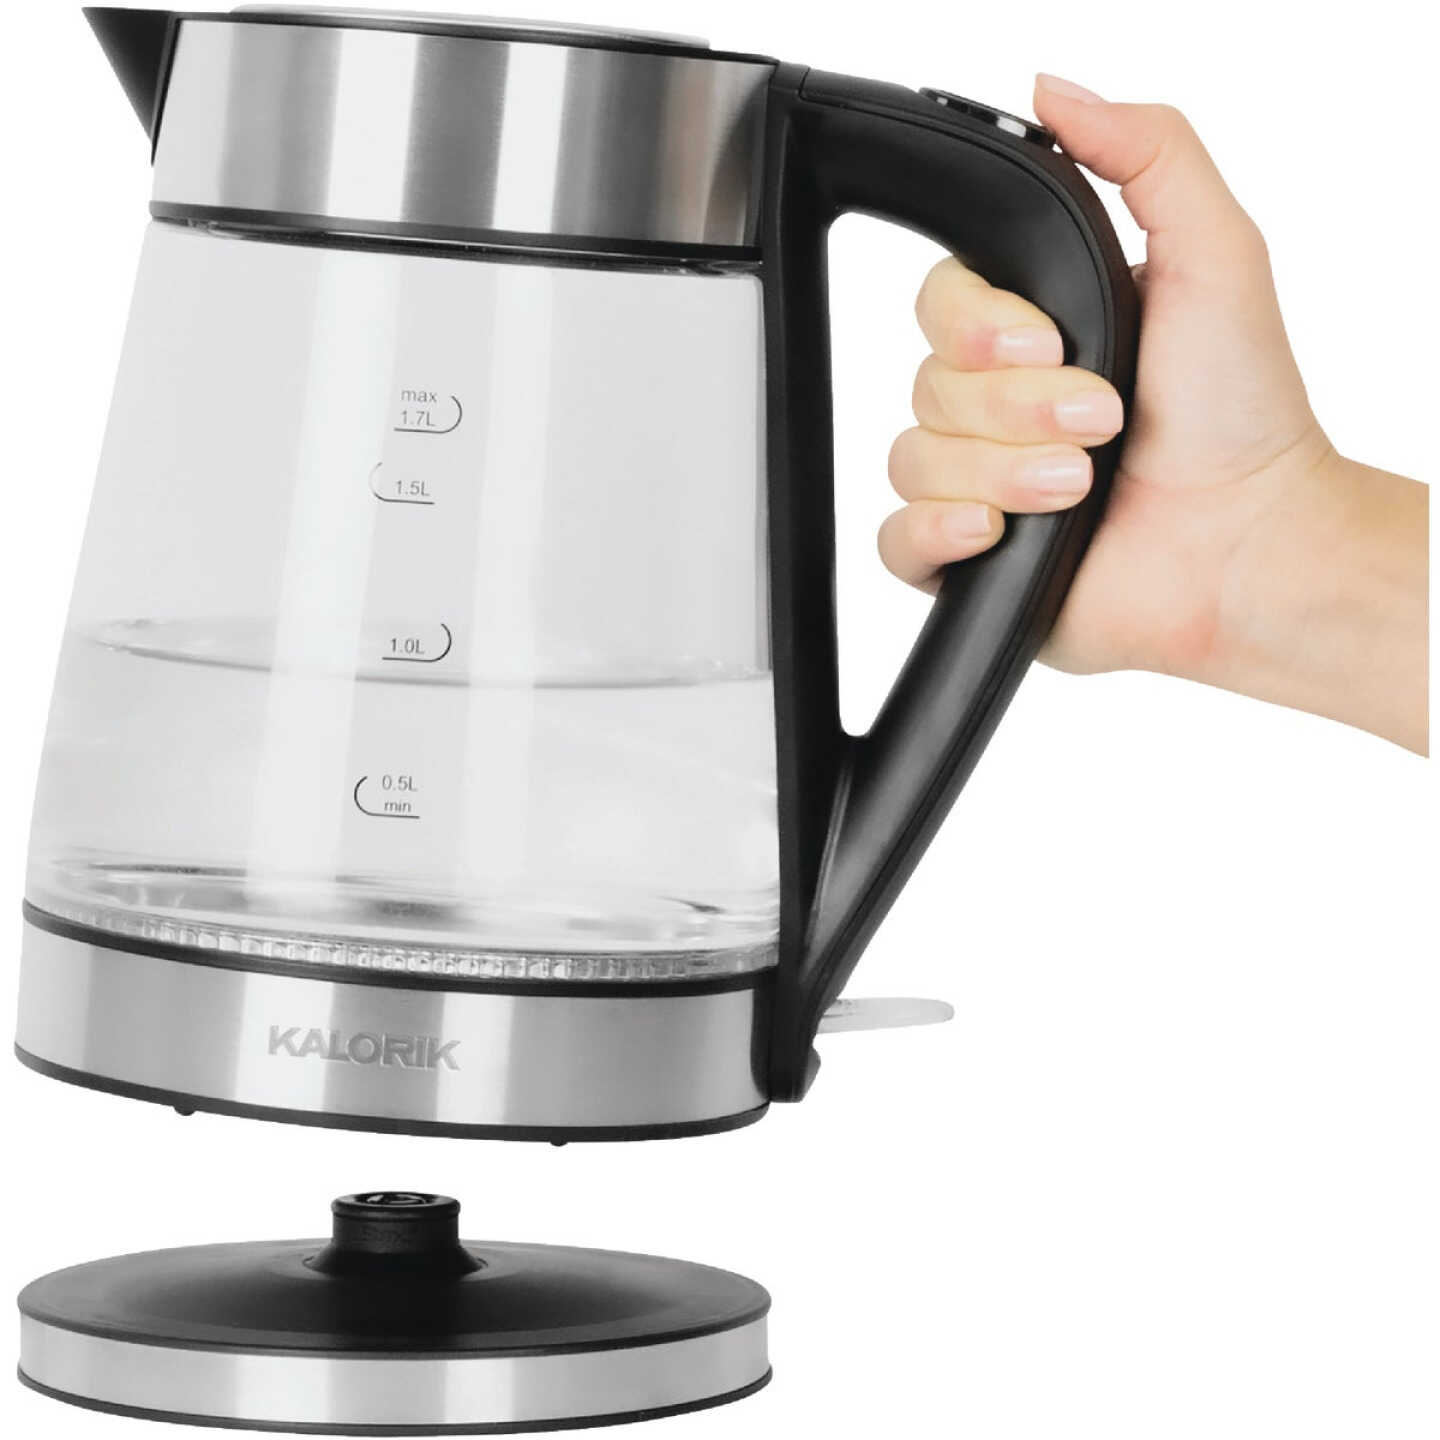 Hamilton Beach 1.7 L Stainless Steel Electric Kettle with LED